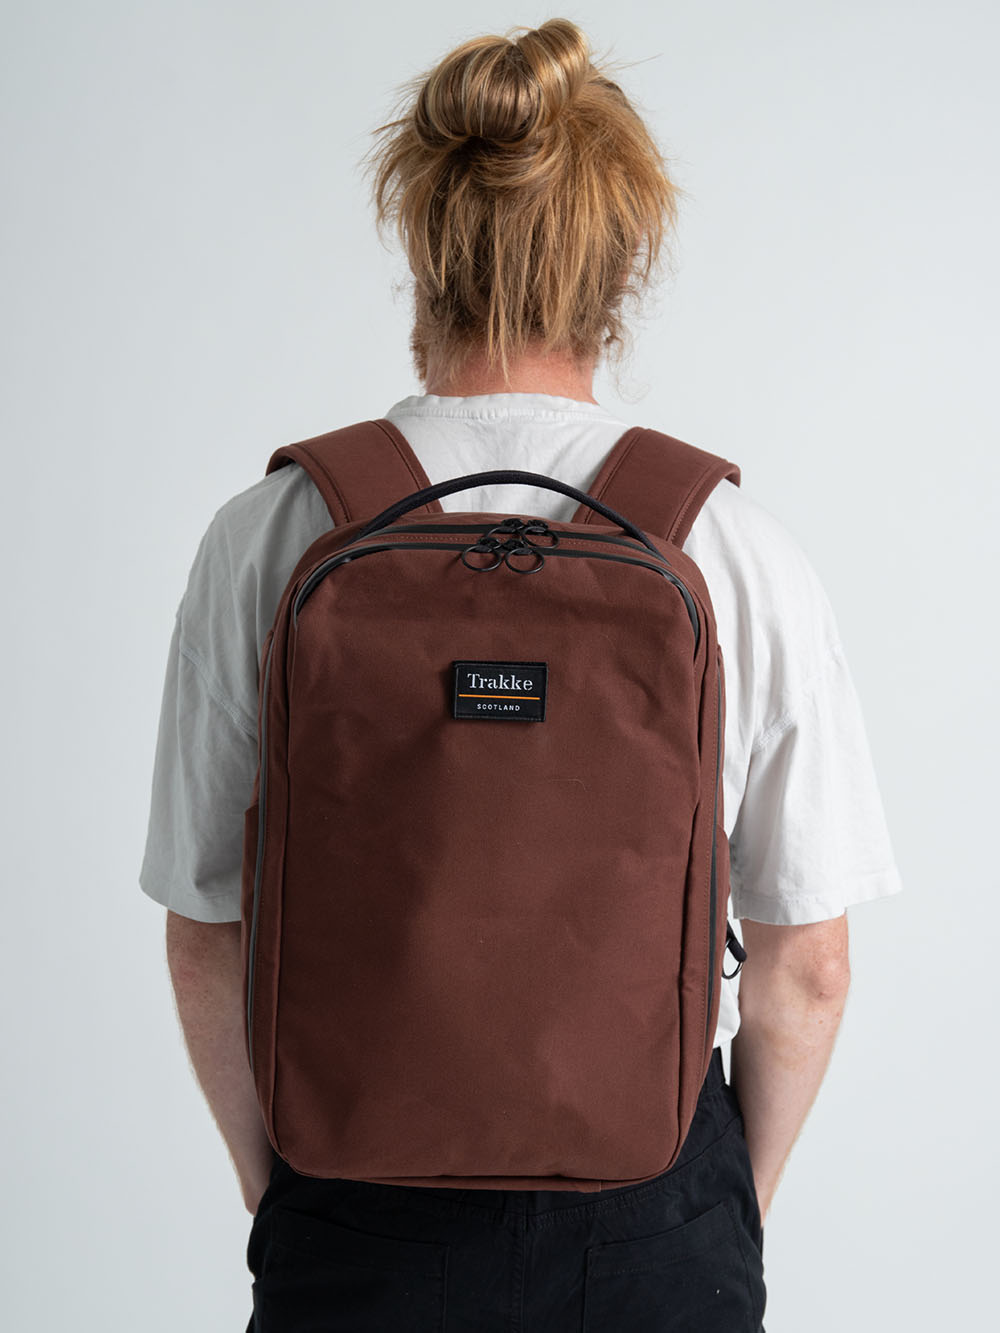 My new backpack - the Trakke Arkaig! - Well Dressed Dad - It is a proper  menswear blog. Like, with original words and opinions and suchlike.